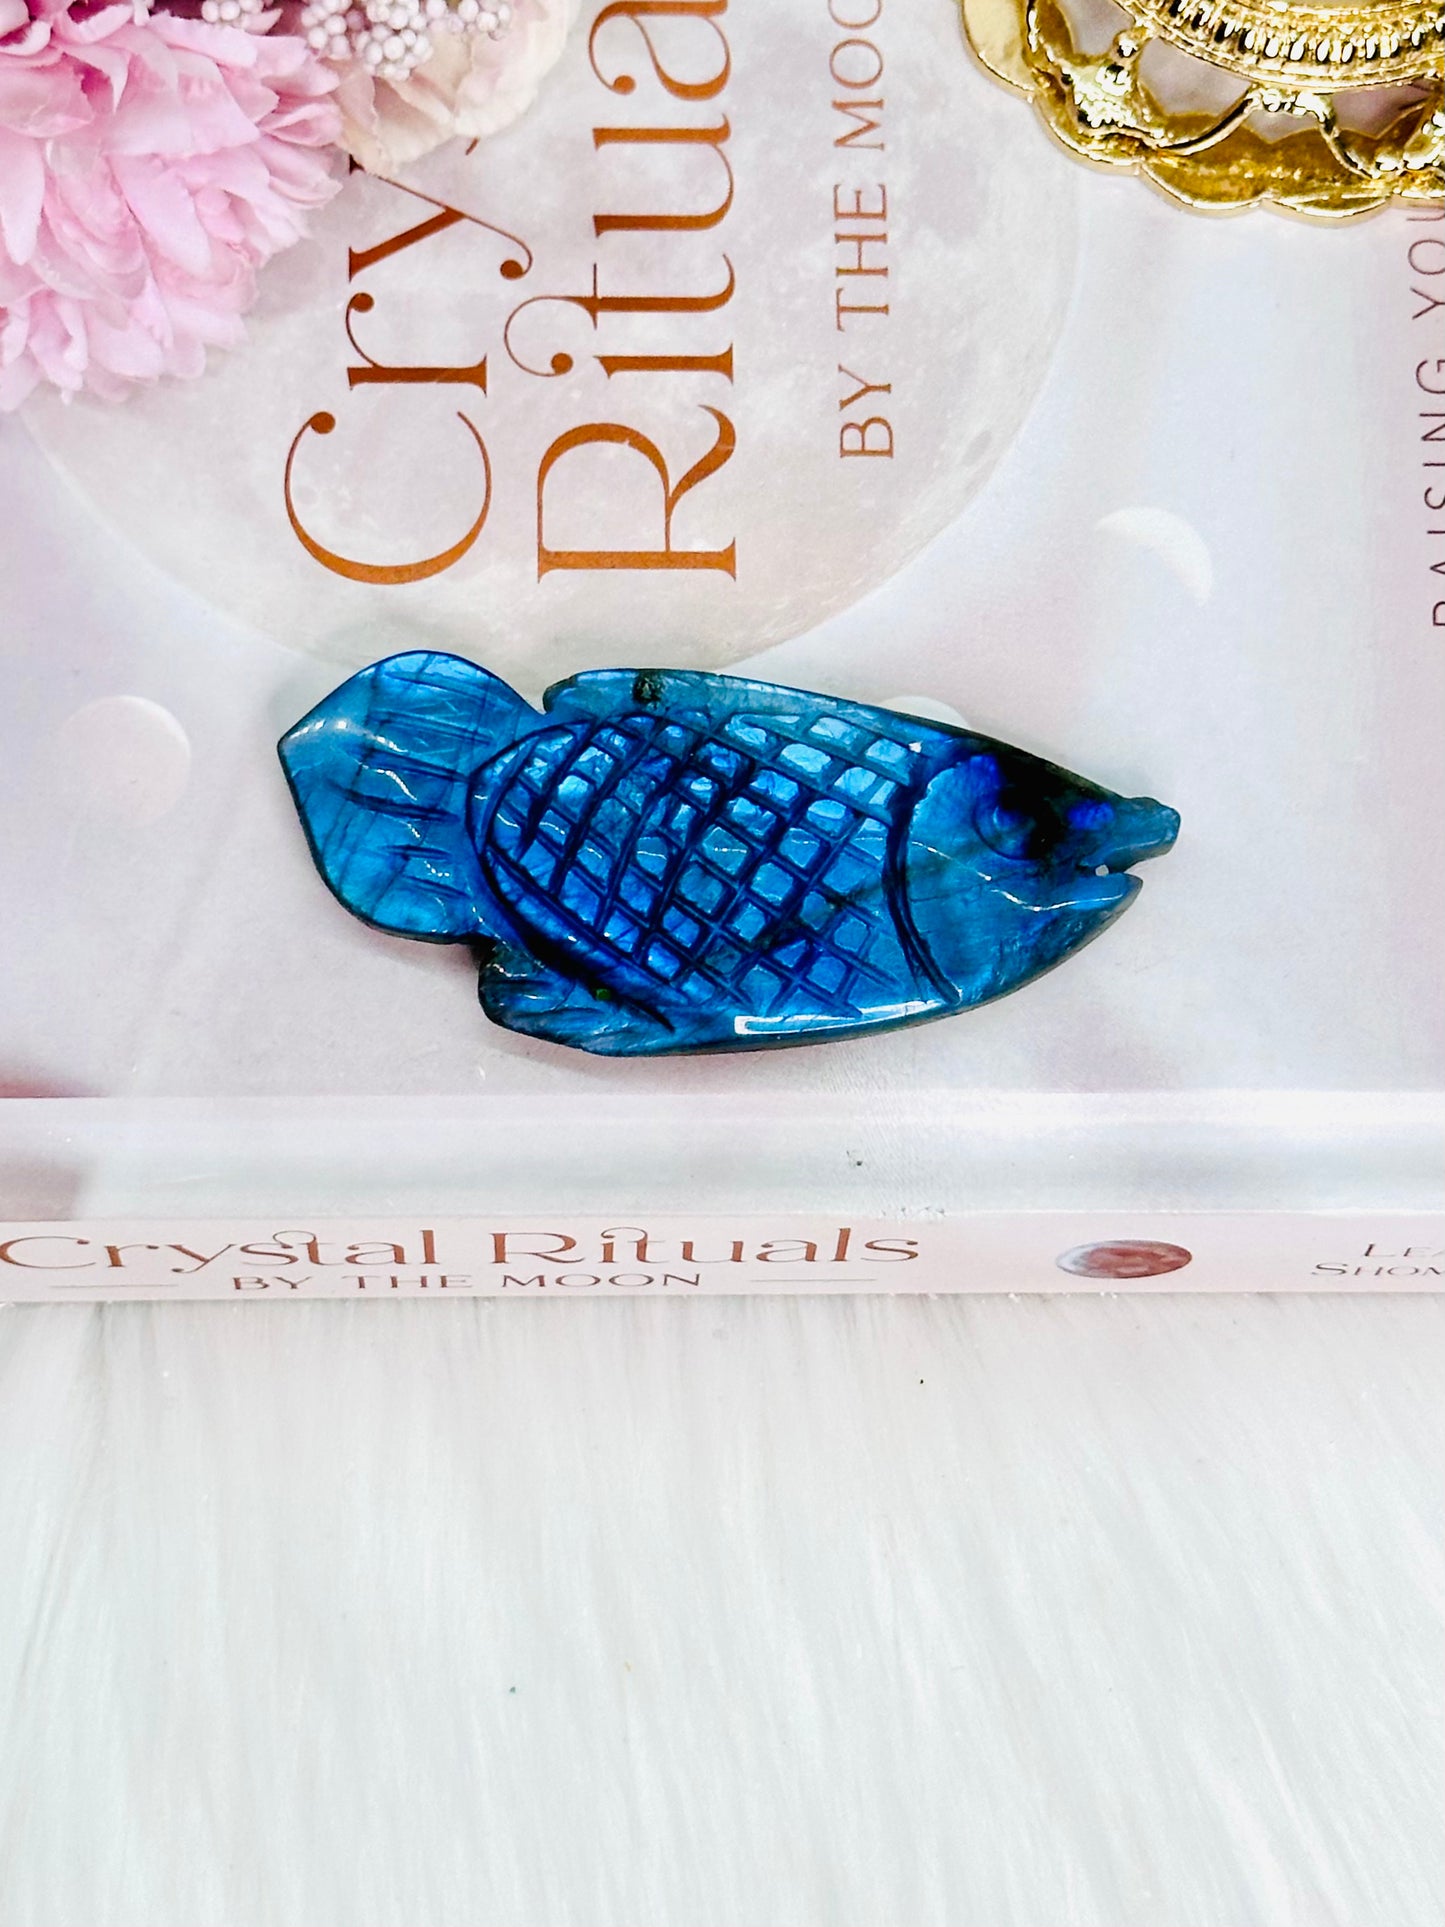 The Most Beautiful Bright Blue Covered With Flash Both Sides Labradorite Fish 8cm